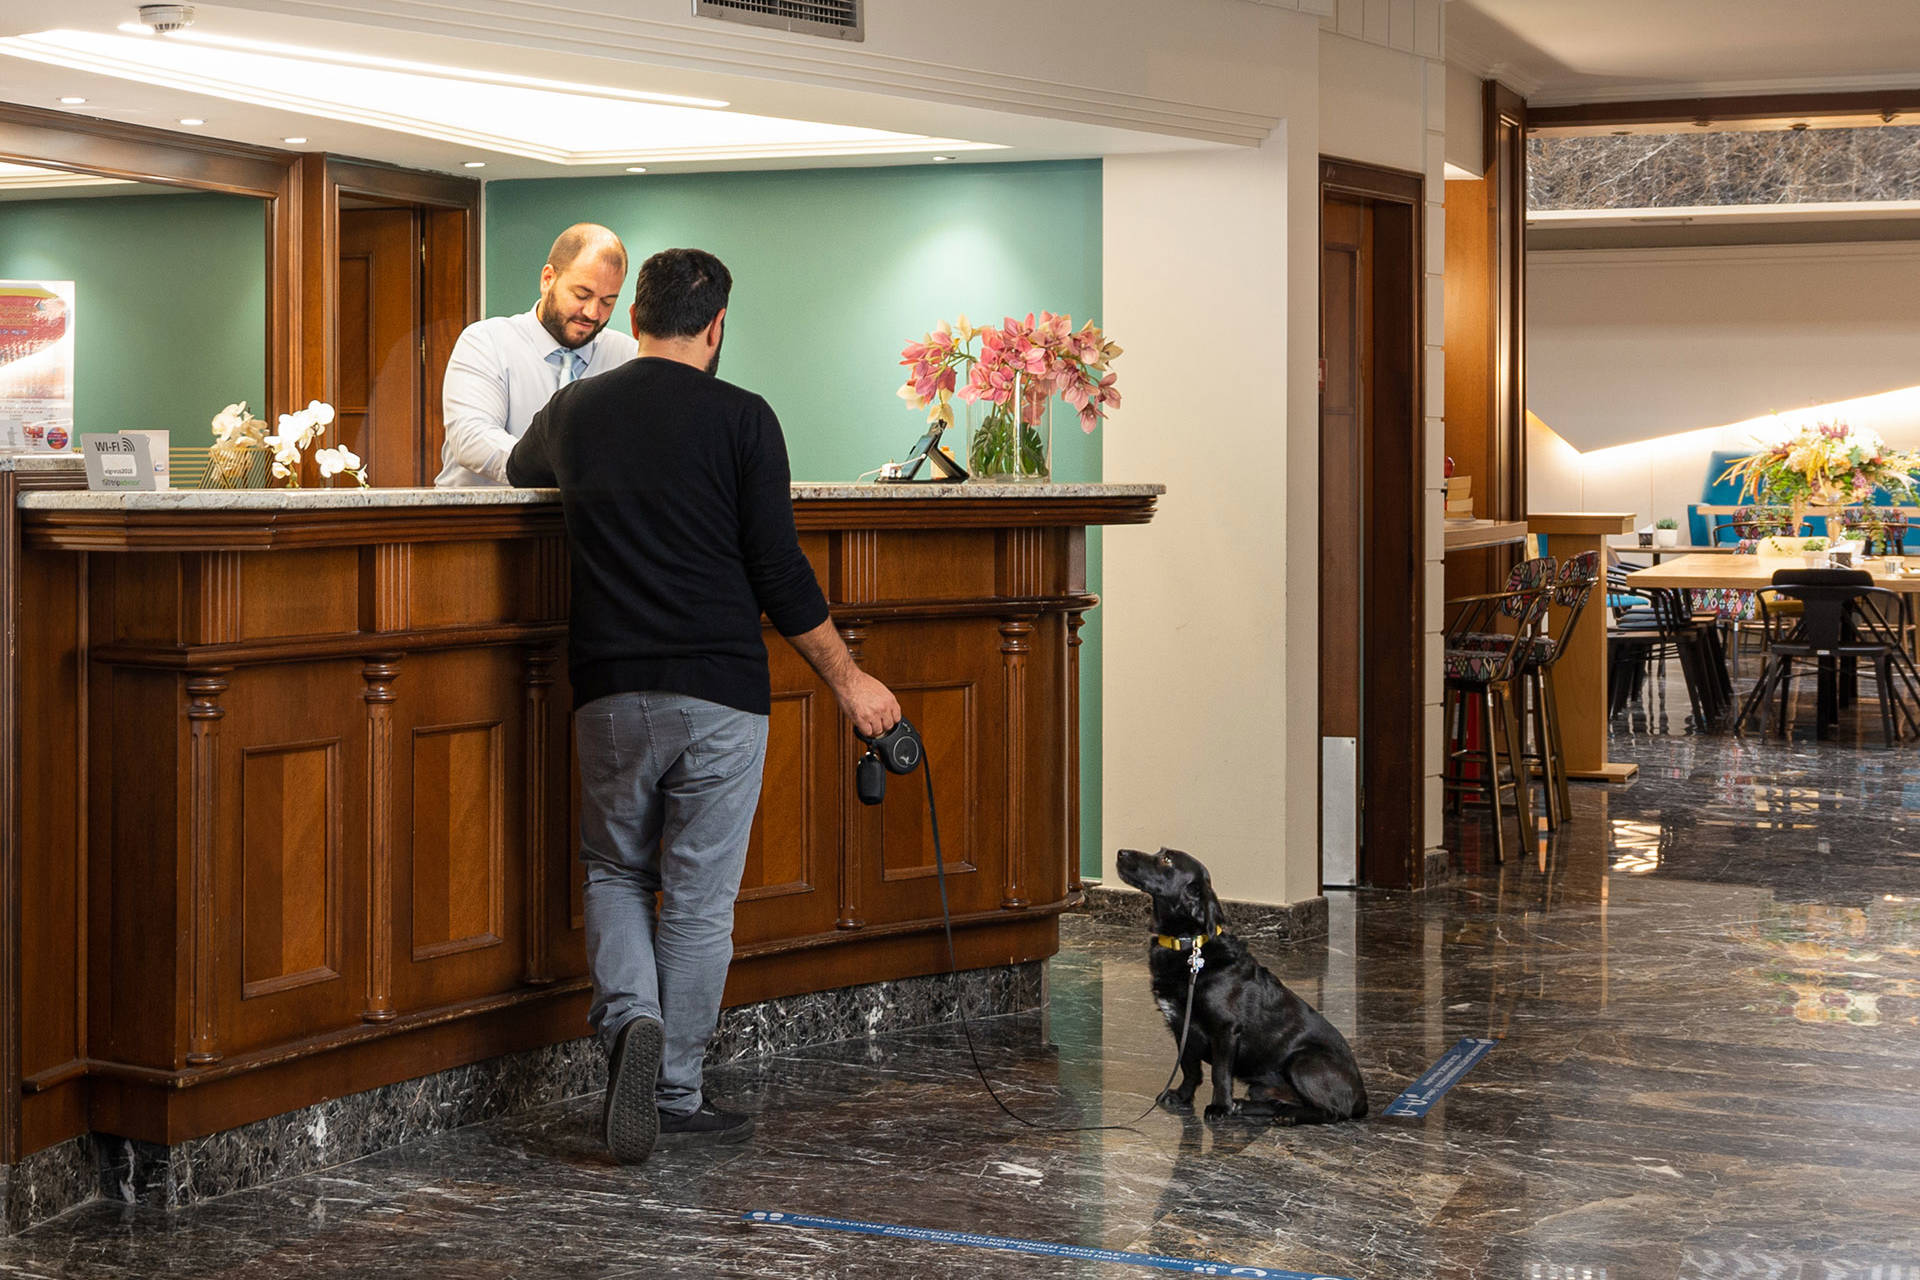 
El Greco Hotel Thessaloniki reception with pet and pet owner